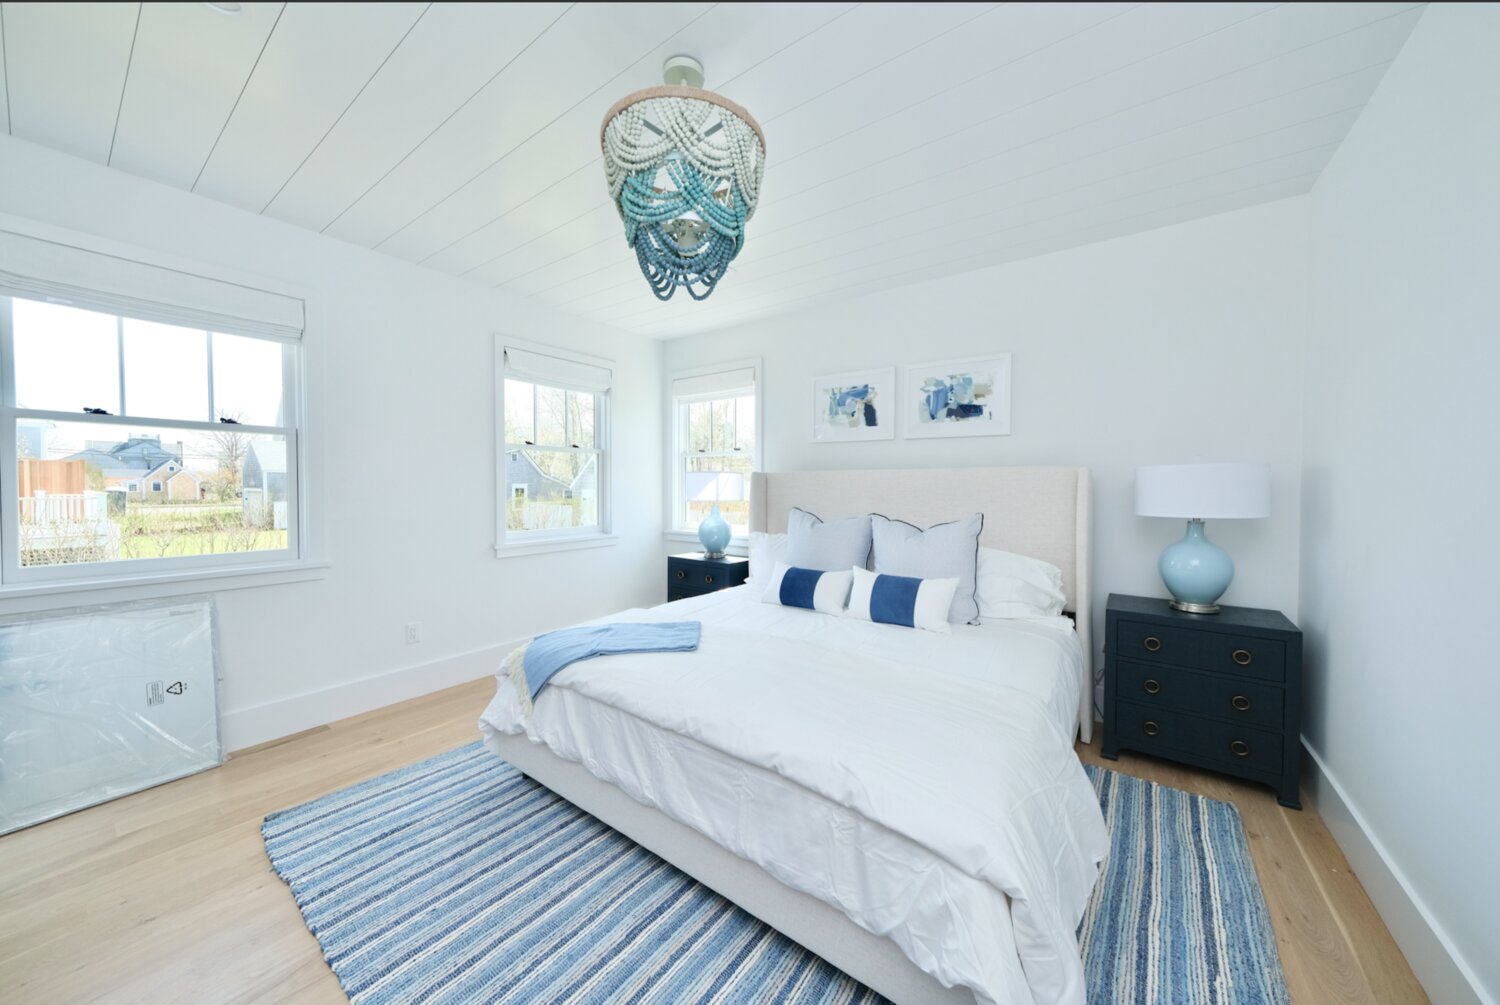 This bedroom has wood floors and multiple windows that let in plenty of natural light.